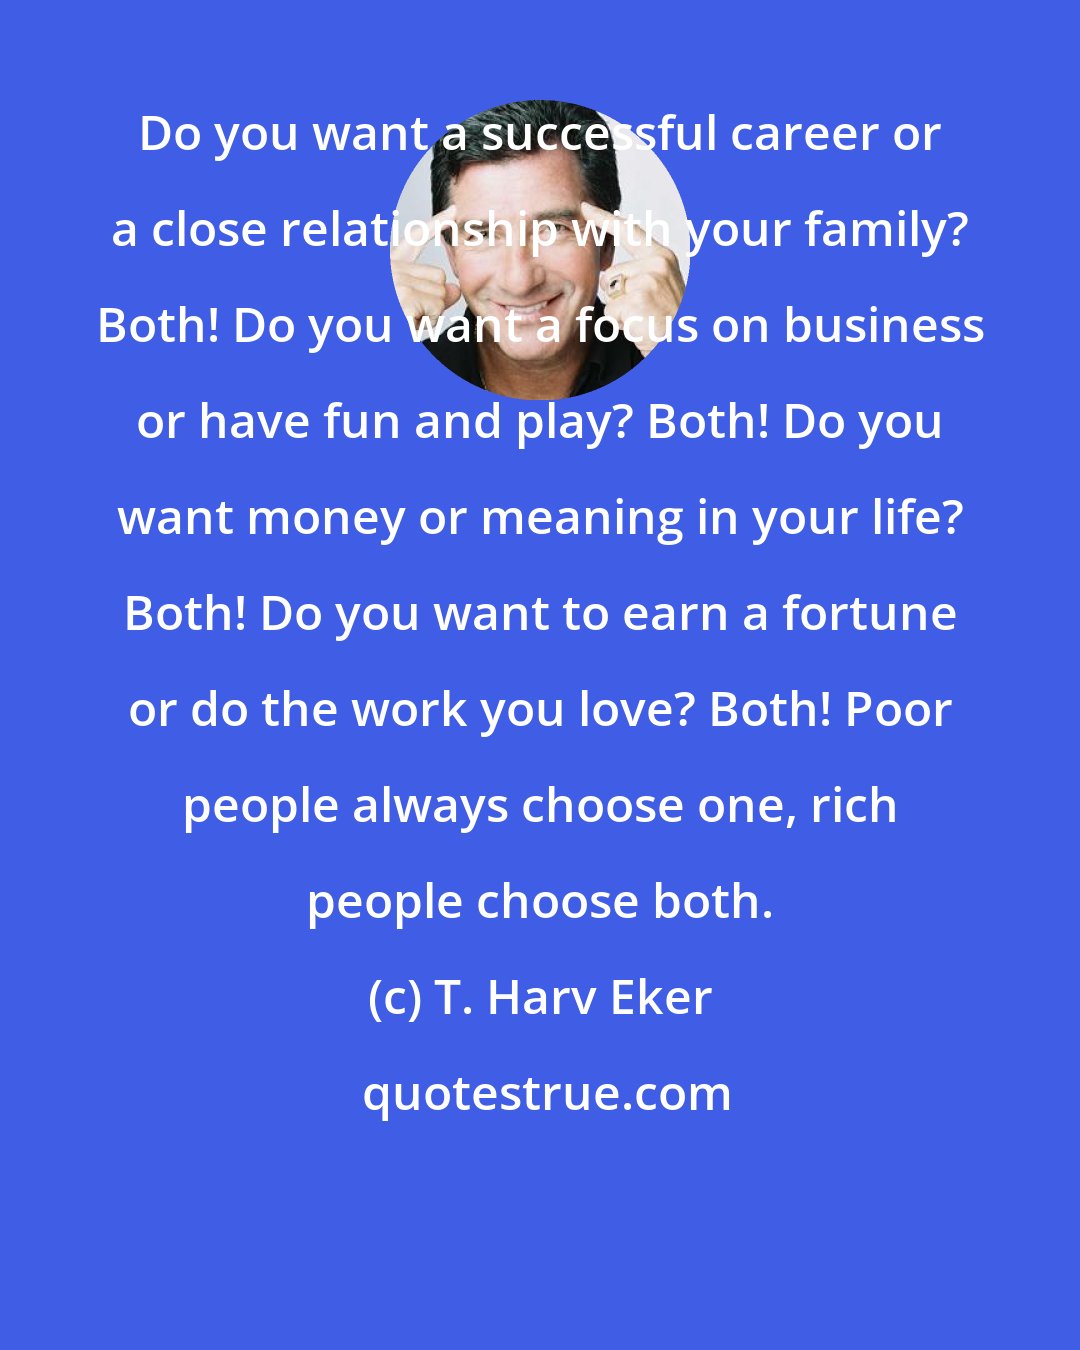 T. Harv Eker: Do you want a successful career or a close relationship with your family? Both! Do you want a focus on business or have fun and play? Both! Do you want money or meaning in your life? Both! Do you want to earn a fortune or do the work you love? Both! Poor people always choose one, rich people choose both.